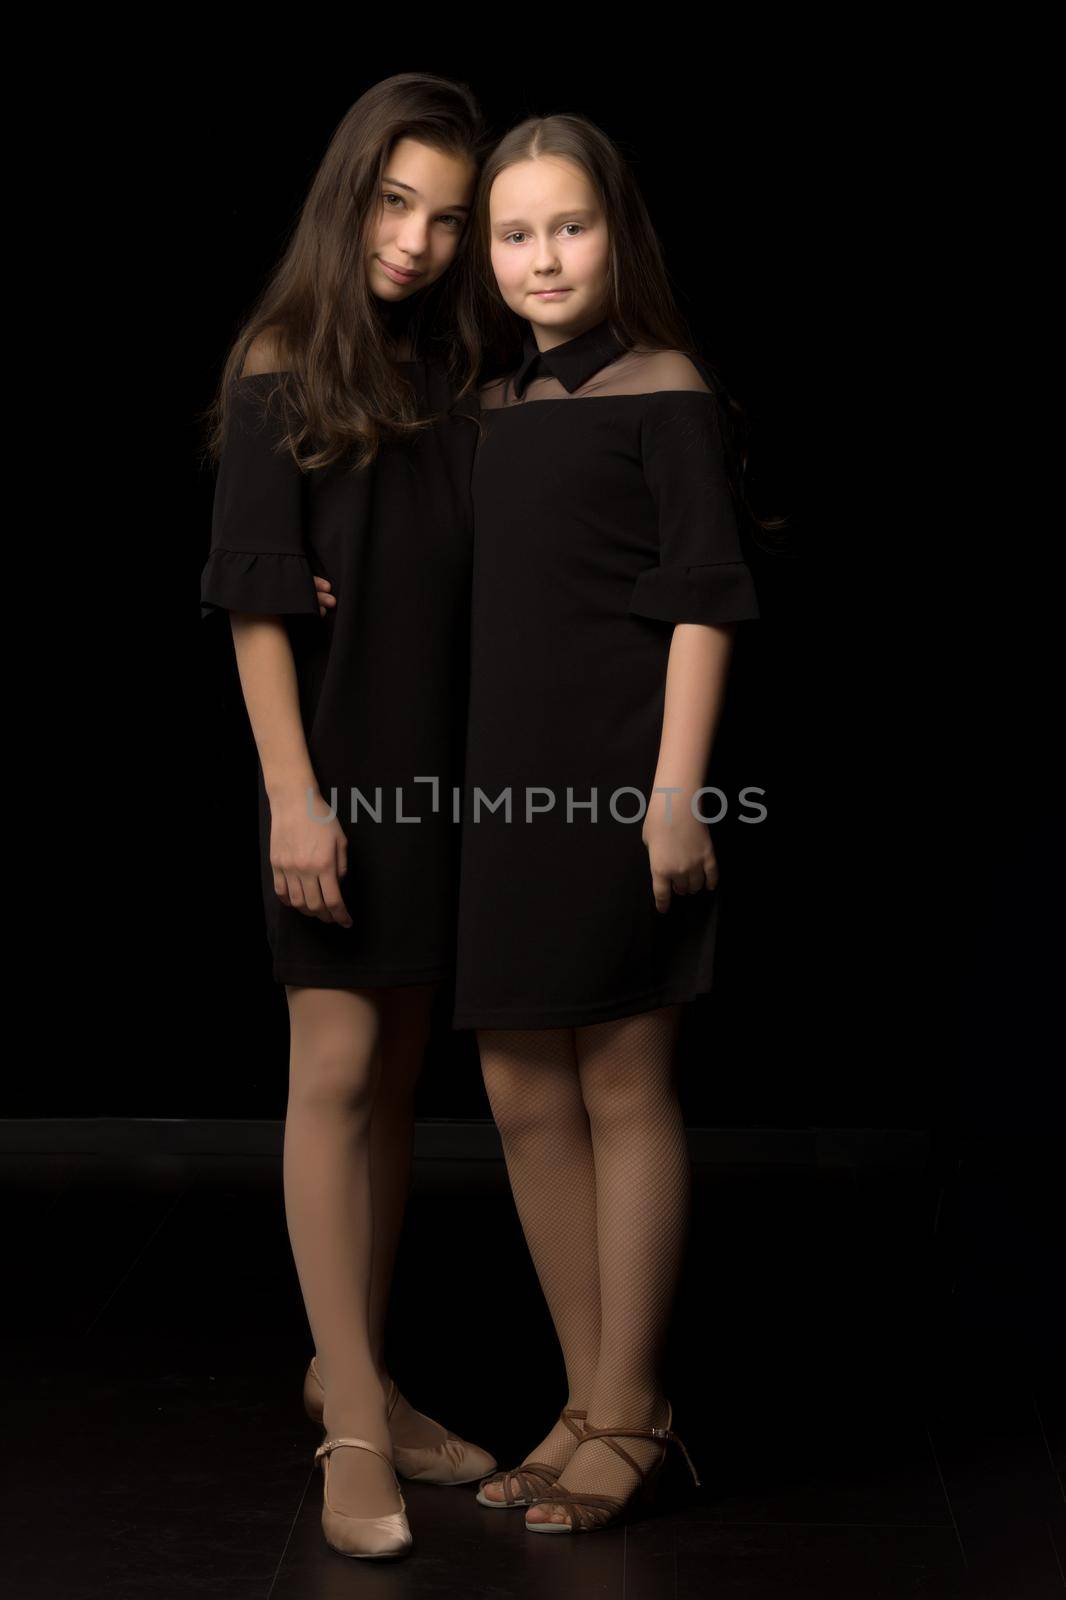 Two cute little girls posing in the studio on a black background. Style and fashion concept, layout for magazine cover.